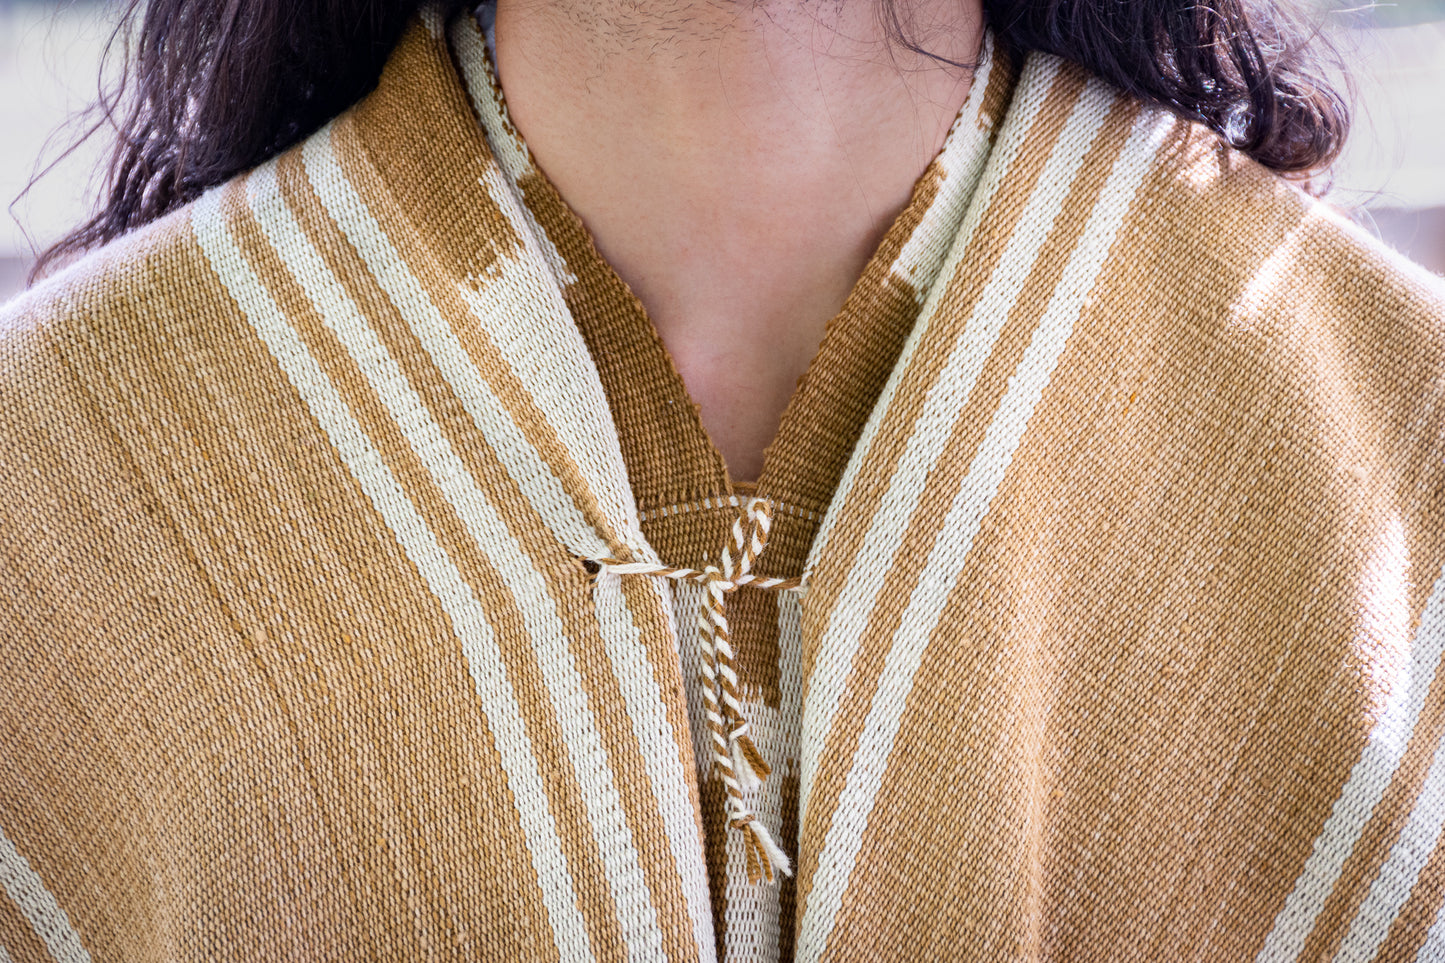 Poncho "Lavalle" Work in Creole Loom